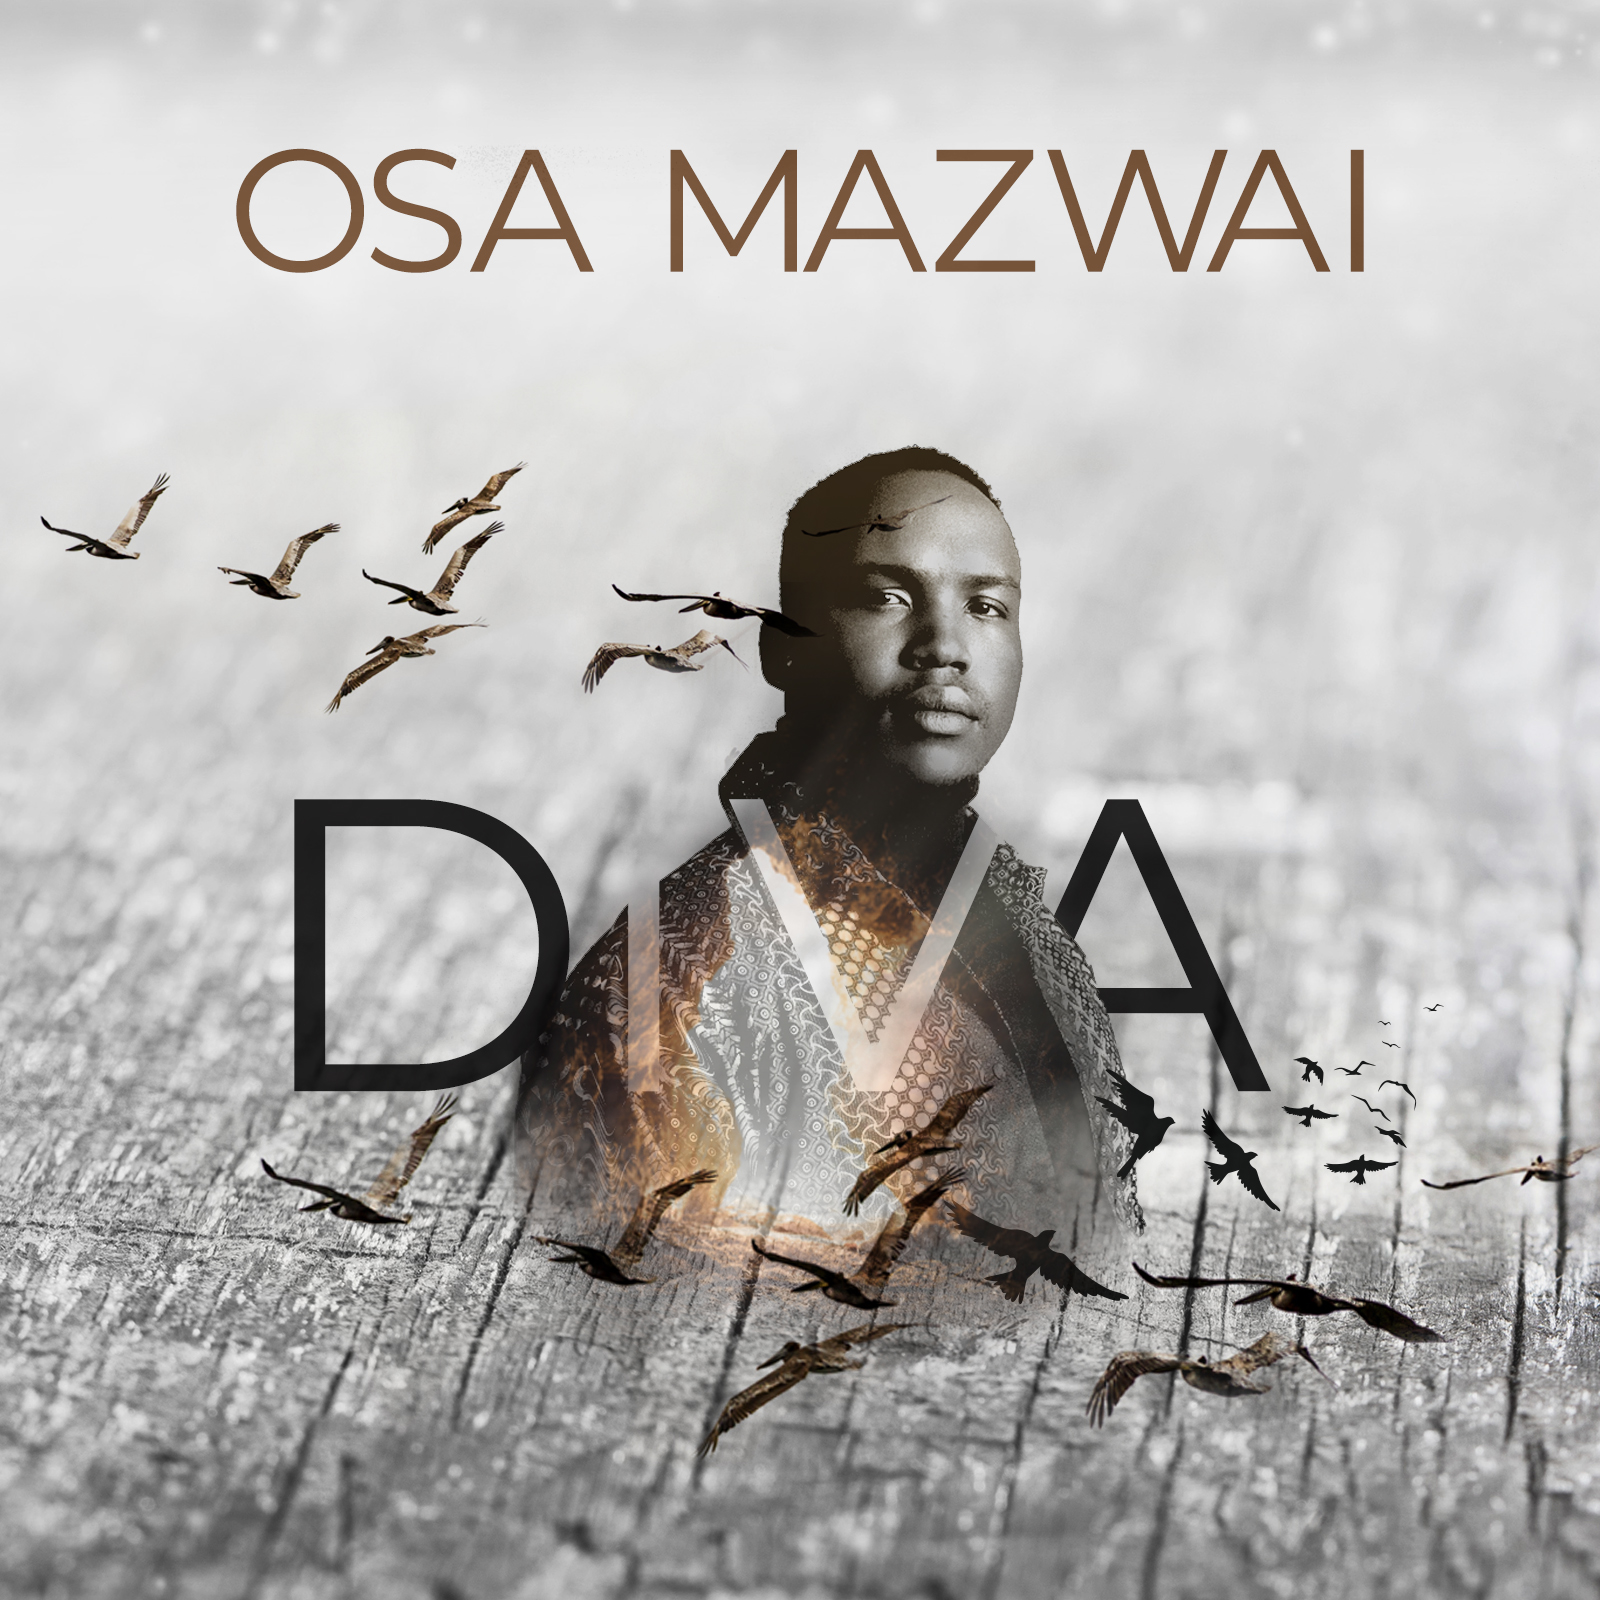 “Fundamentally, this song is about encouraging and enabling the girl-child to achieve their full destiny” says ‘Osa Mazwai’ about new single #DIVA.